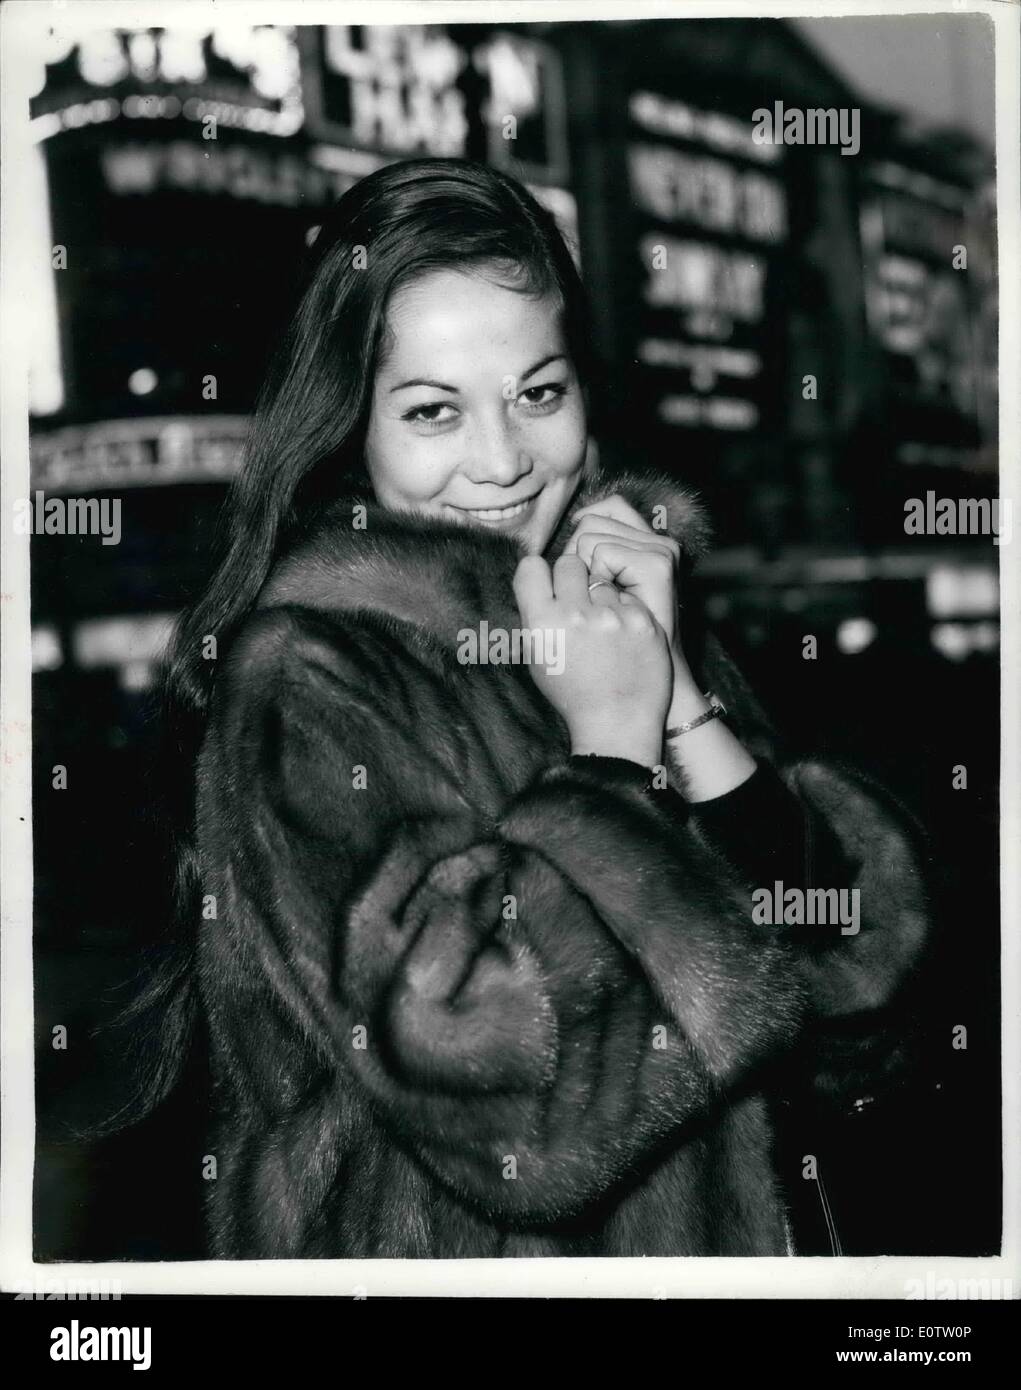 Sep. 12, 1960 - 9-12-60 Nancy Kwan goes sight-seeing in Piccadilly Circus. Nancy Kwan the star of the new film The World of Suzie Wong here for the premiere next Wednesday, went for a sightseeing tour of London this morning. Keystone Photo Shows: Nancy Kwan snuggles up into her coat in the cold breeze at Piccadilly Circus this morning. Stock Photo